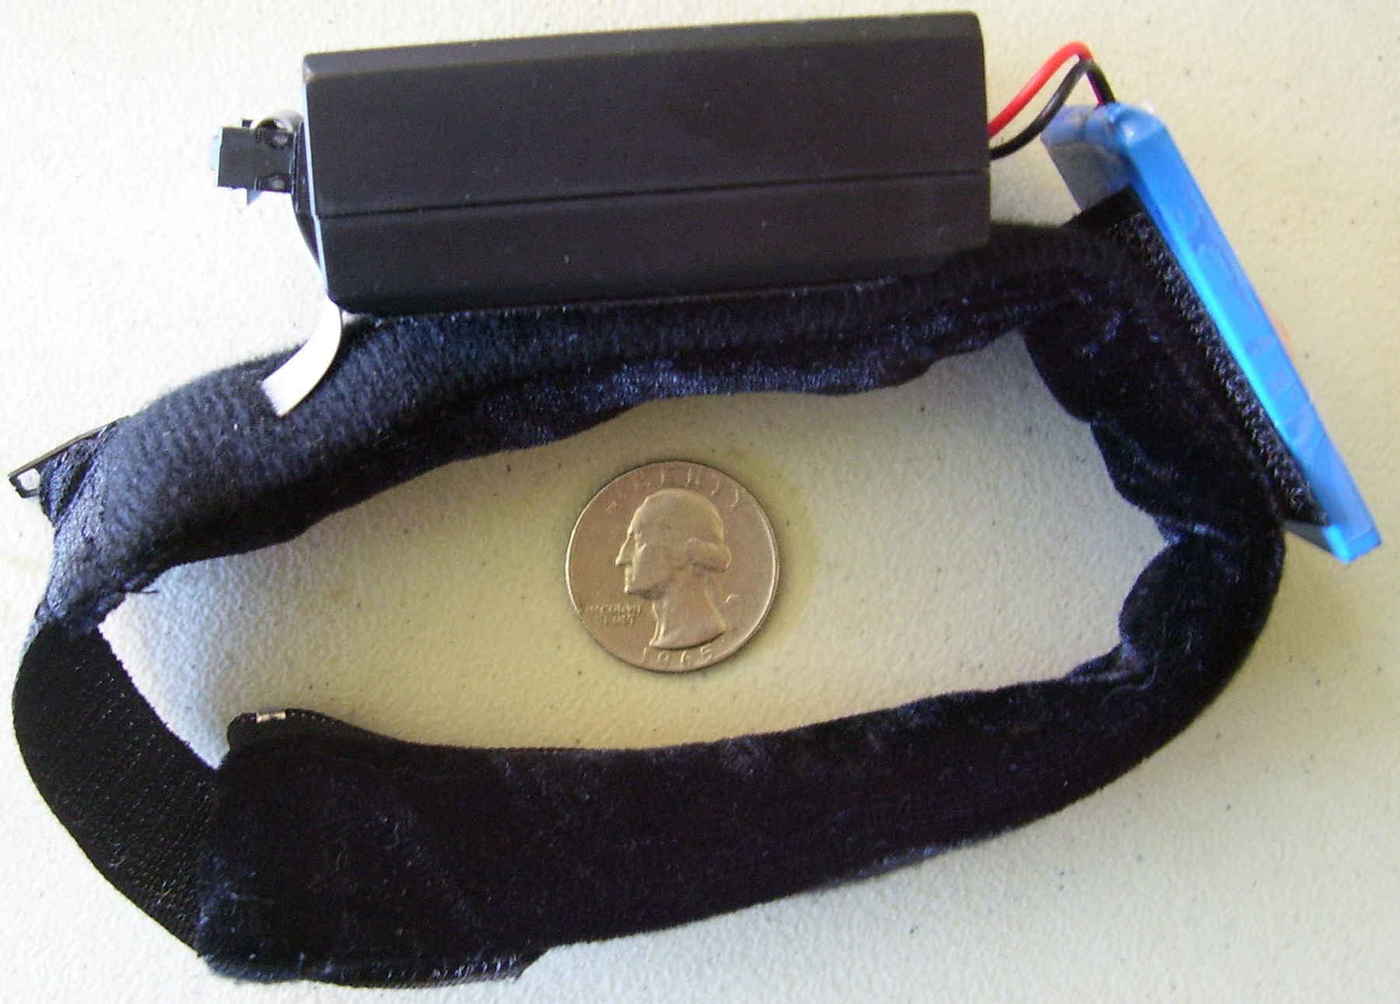 North Paw in closed configuration (quarter for scale).